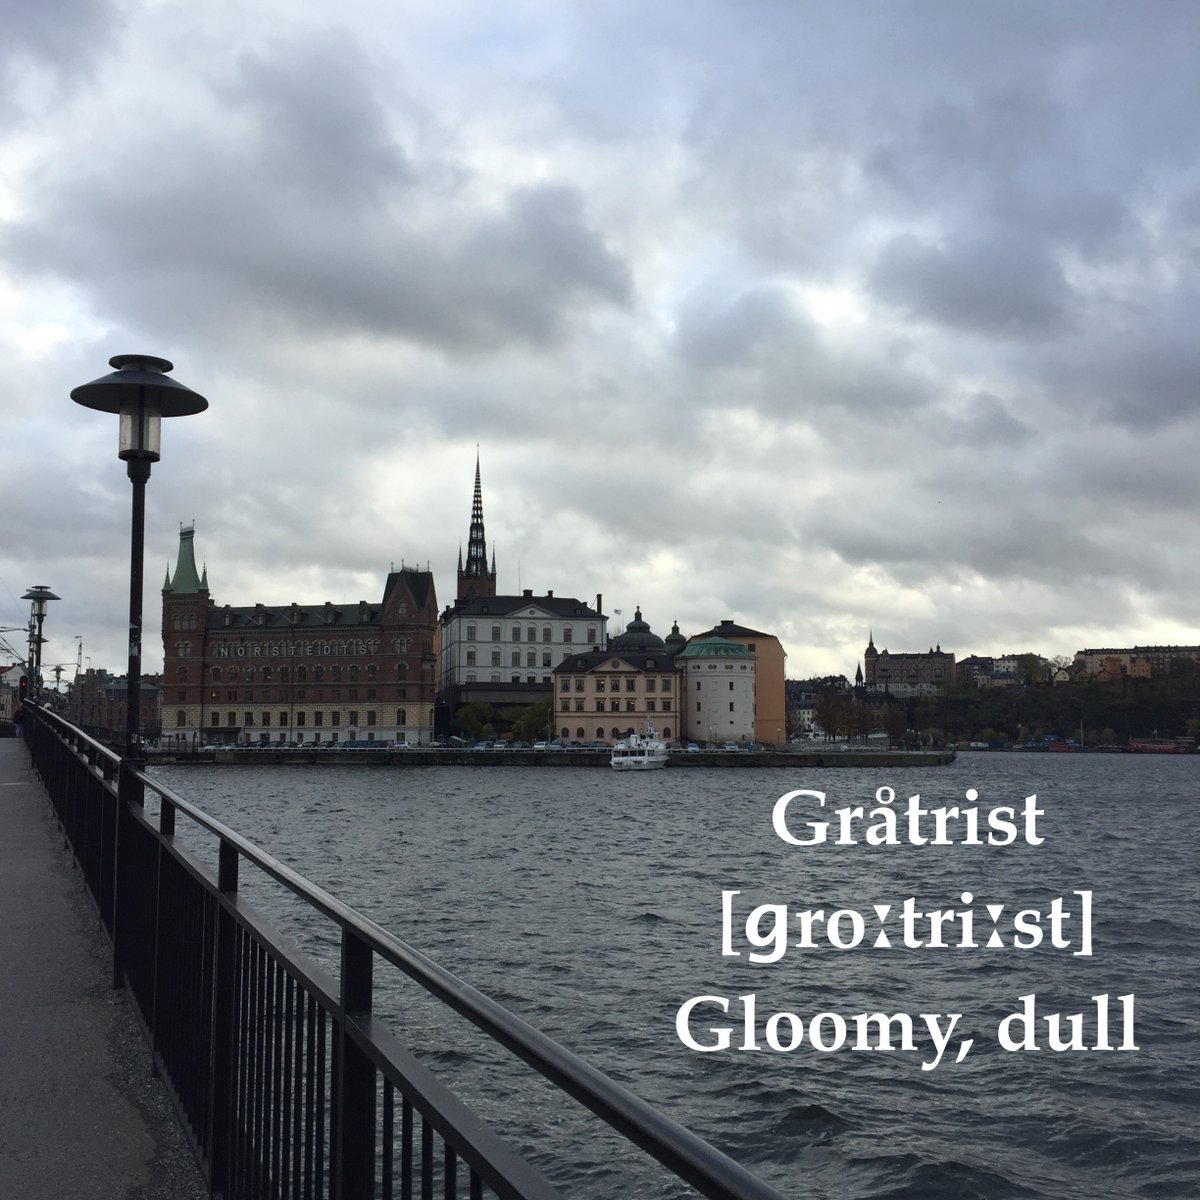 #Swedish expression of the day: #gråtrist (#gloomy, #dull) literally translates to 'grey boring' and well describes many November days.
#fiftyshadesofgrey